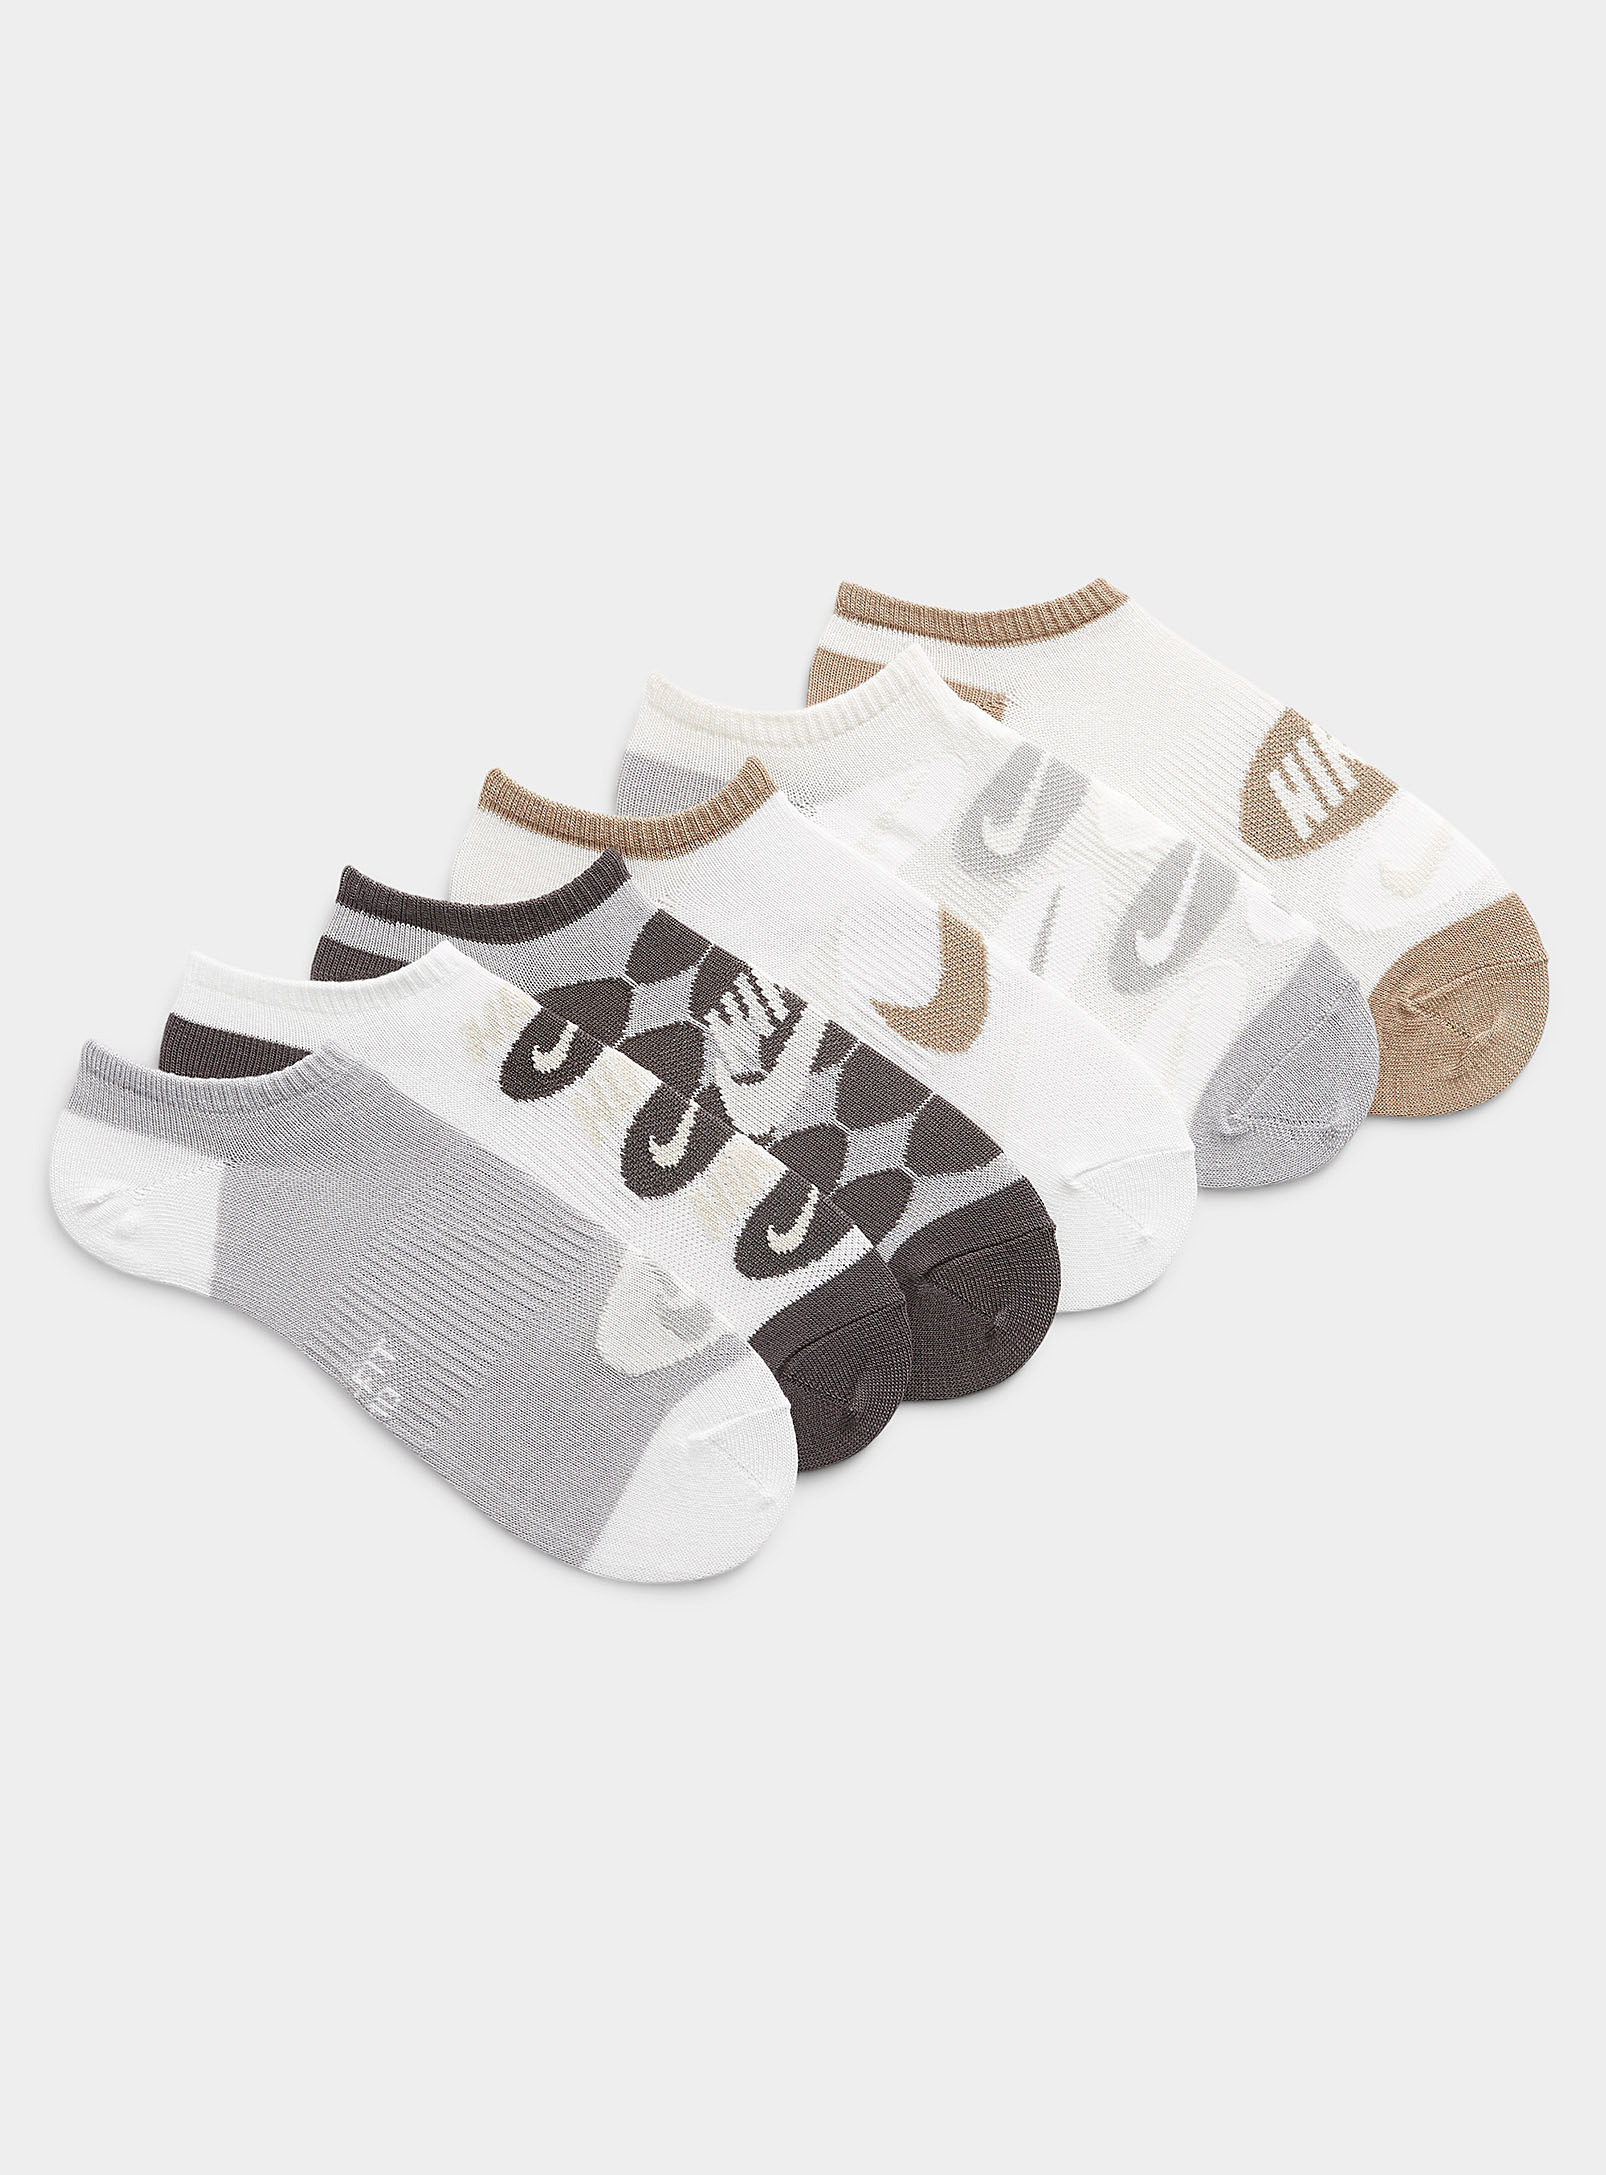 Nike Everyday Neutral-coloured Ped Socks 6-pack In Assorted